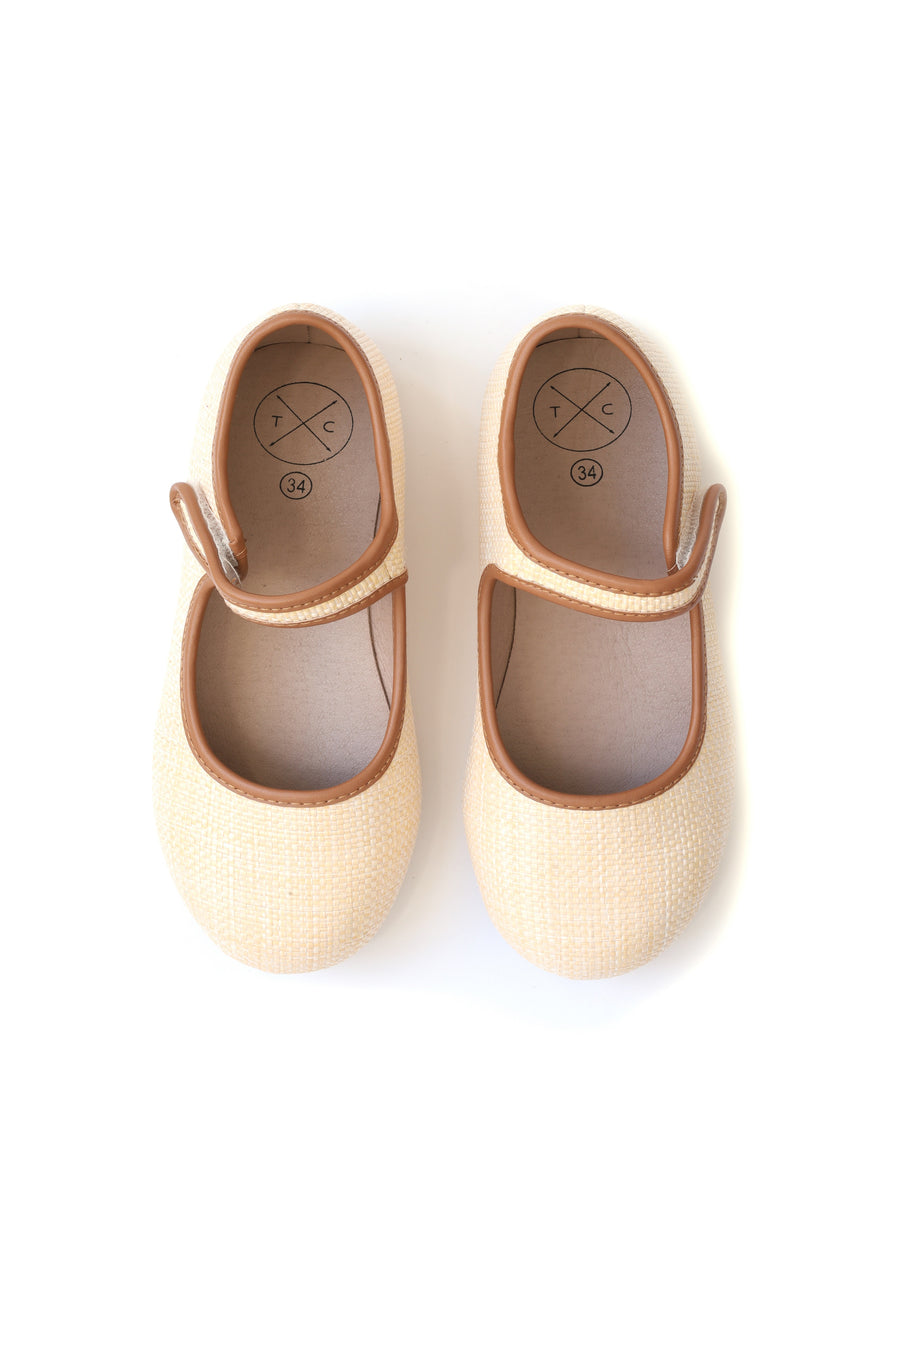 Wheat Mary Janes by Tannery